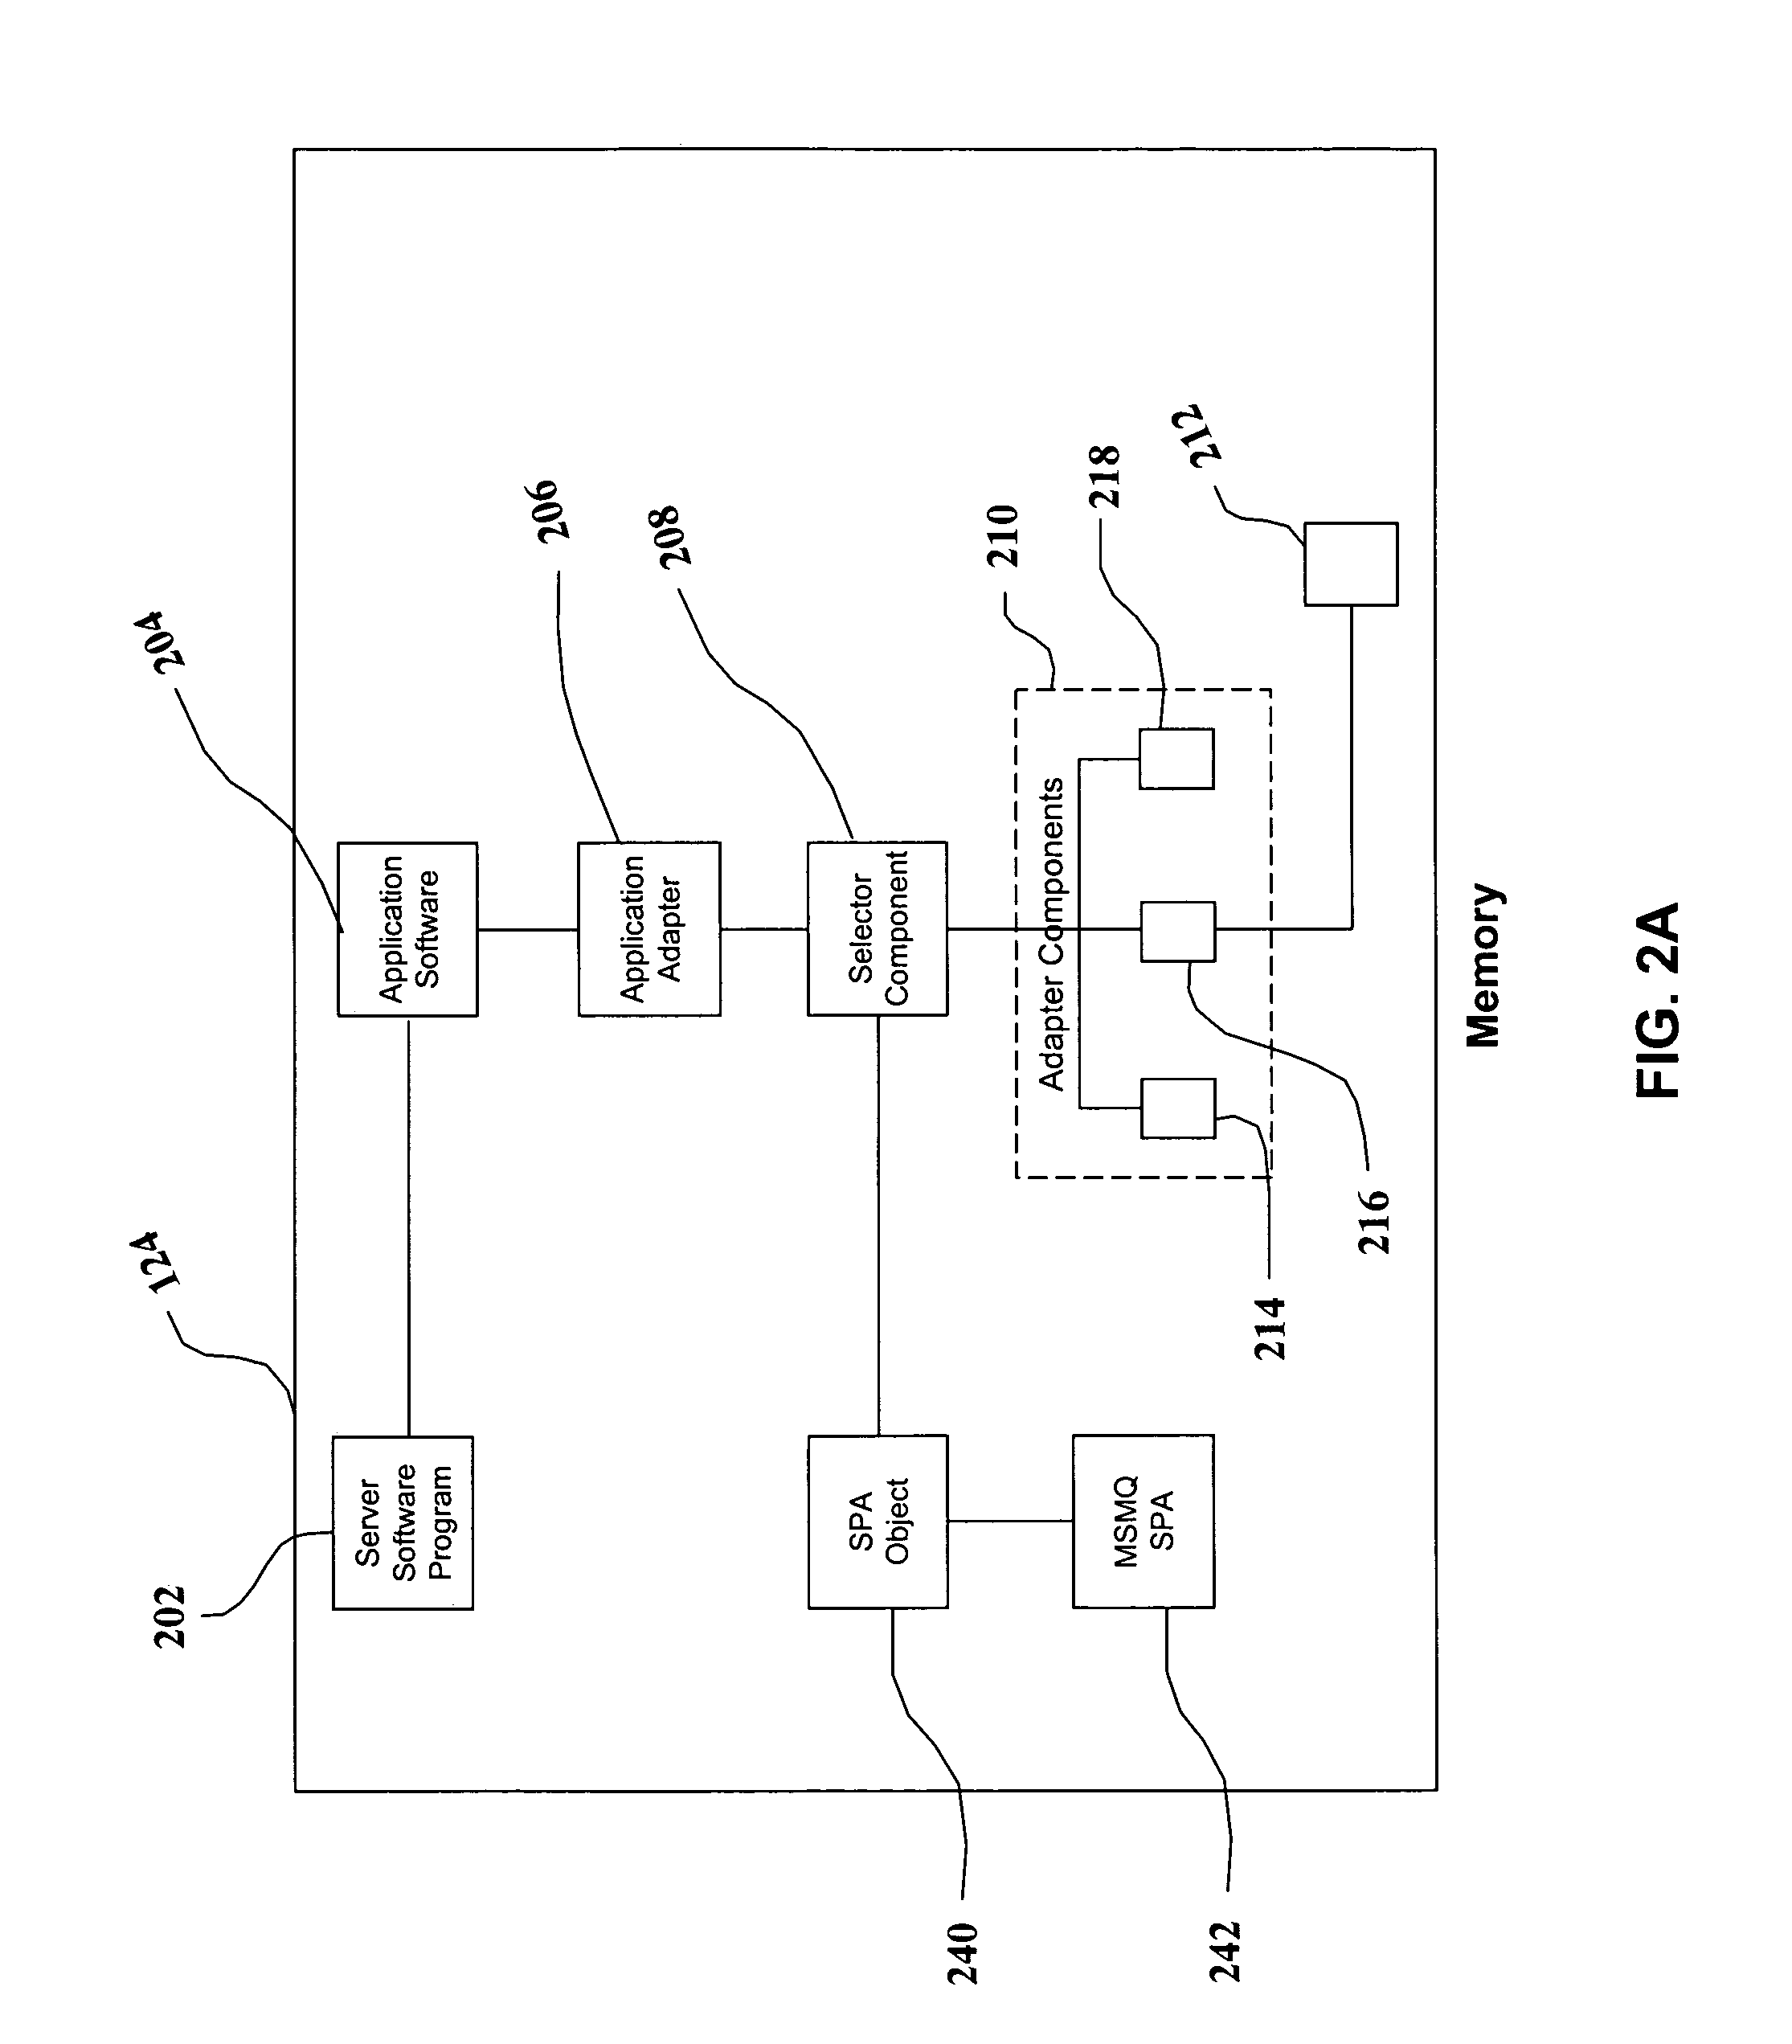 End-to-end transaction processing and statusing system and method